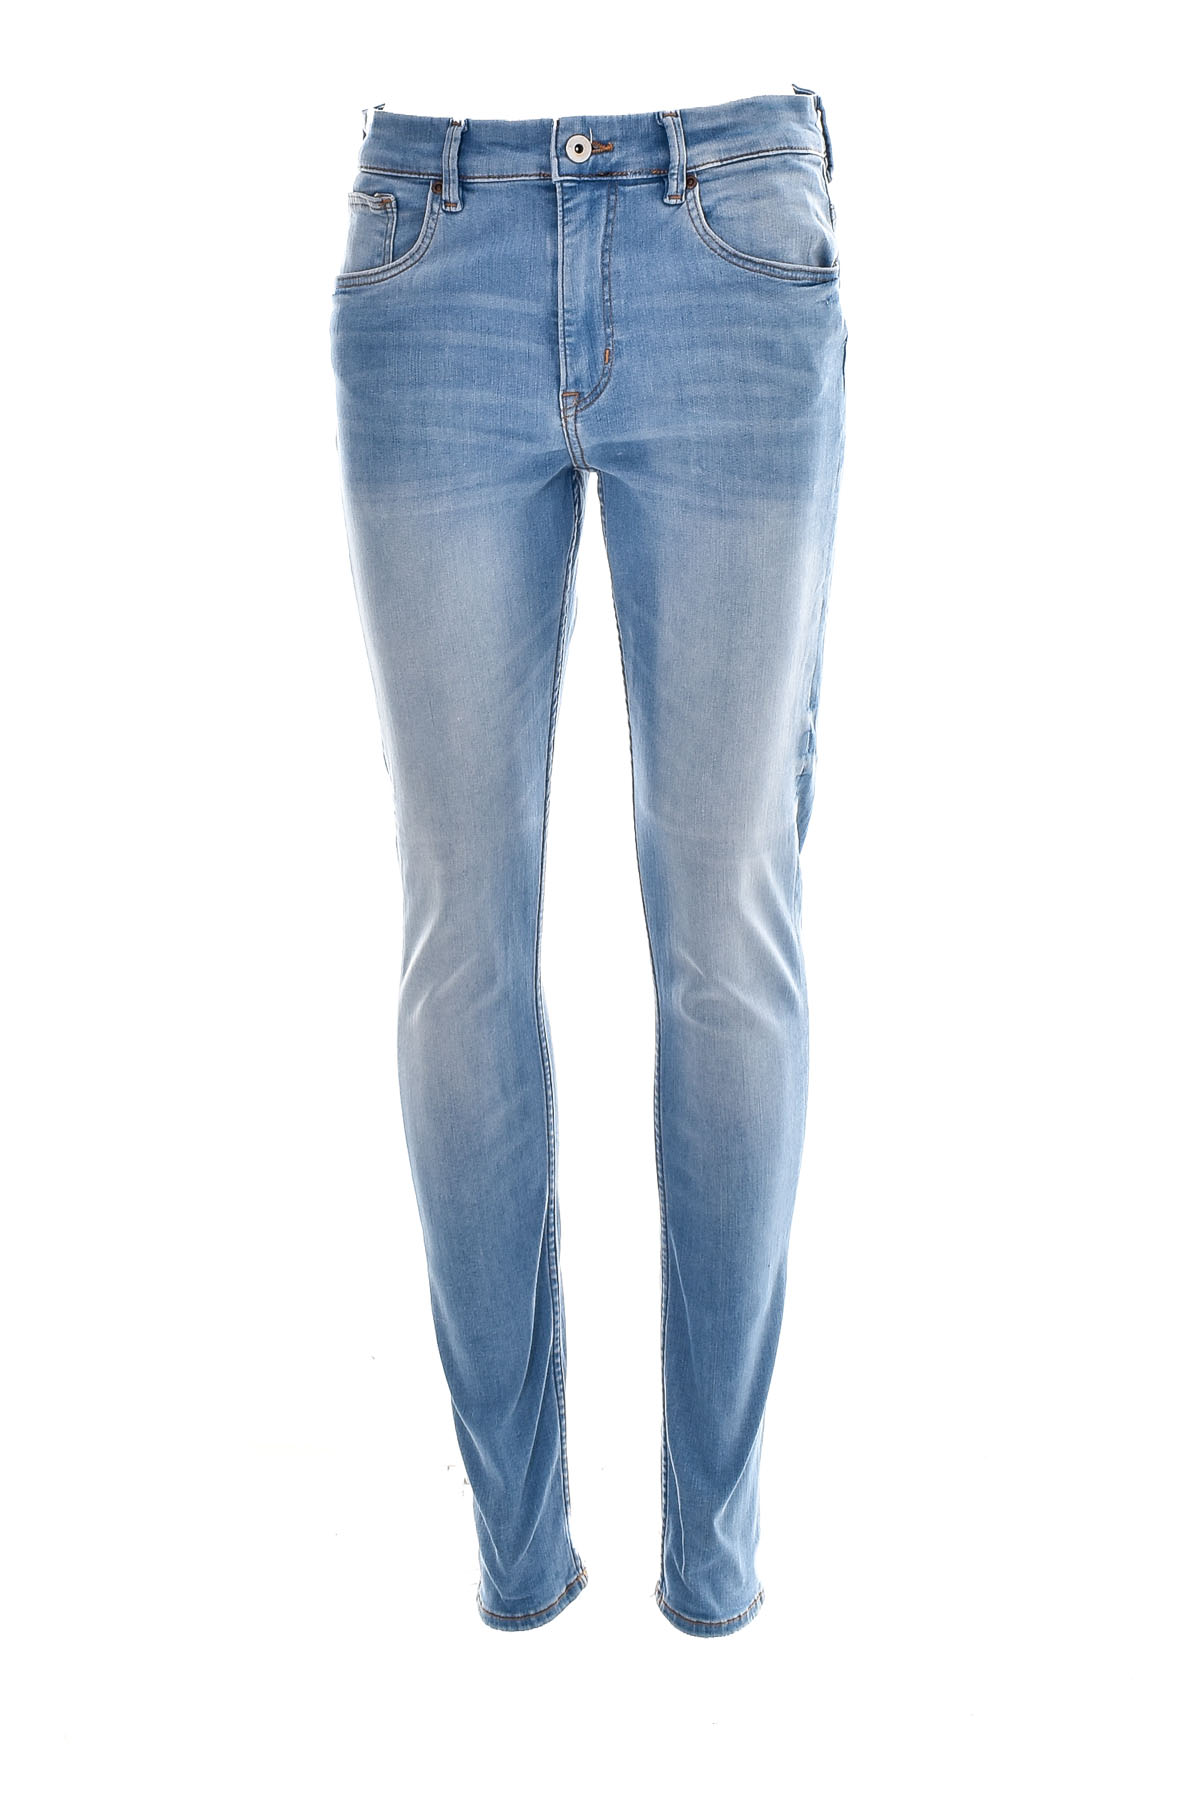 Girl's jeans - H&M - 0